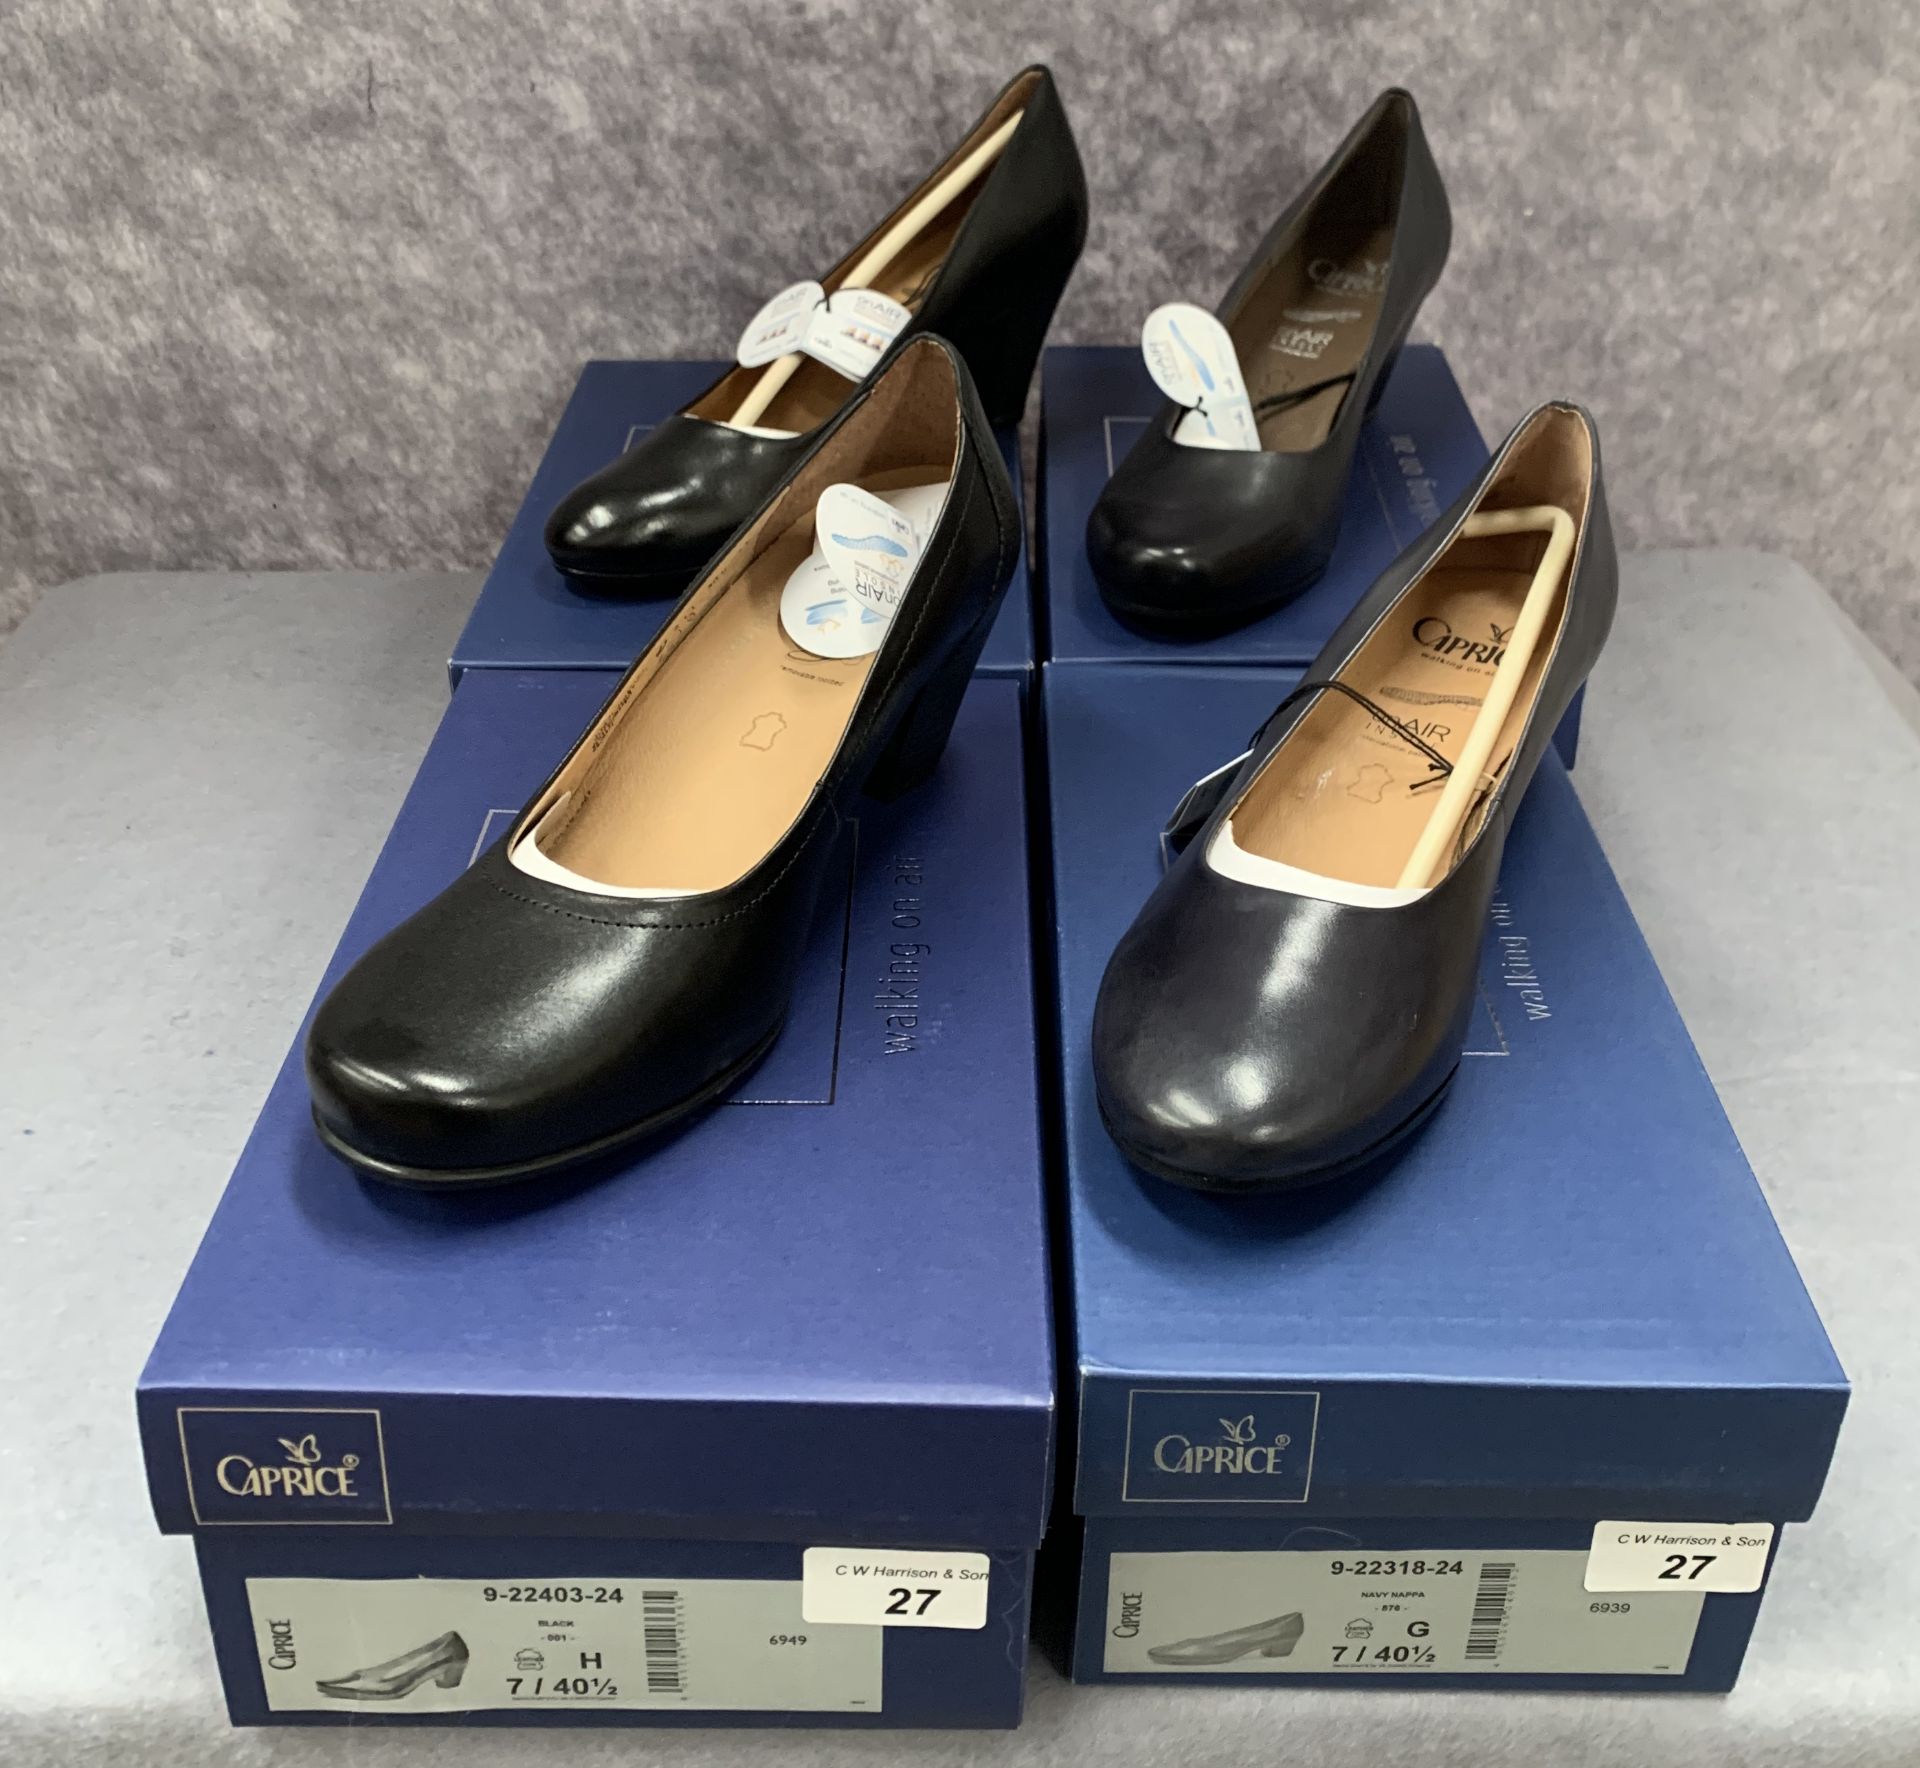 Four pairs of Caprice ladies shoes in black (3) and navy (1), various styles, size 7,